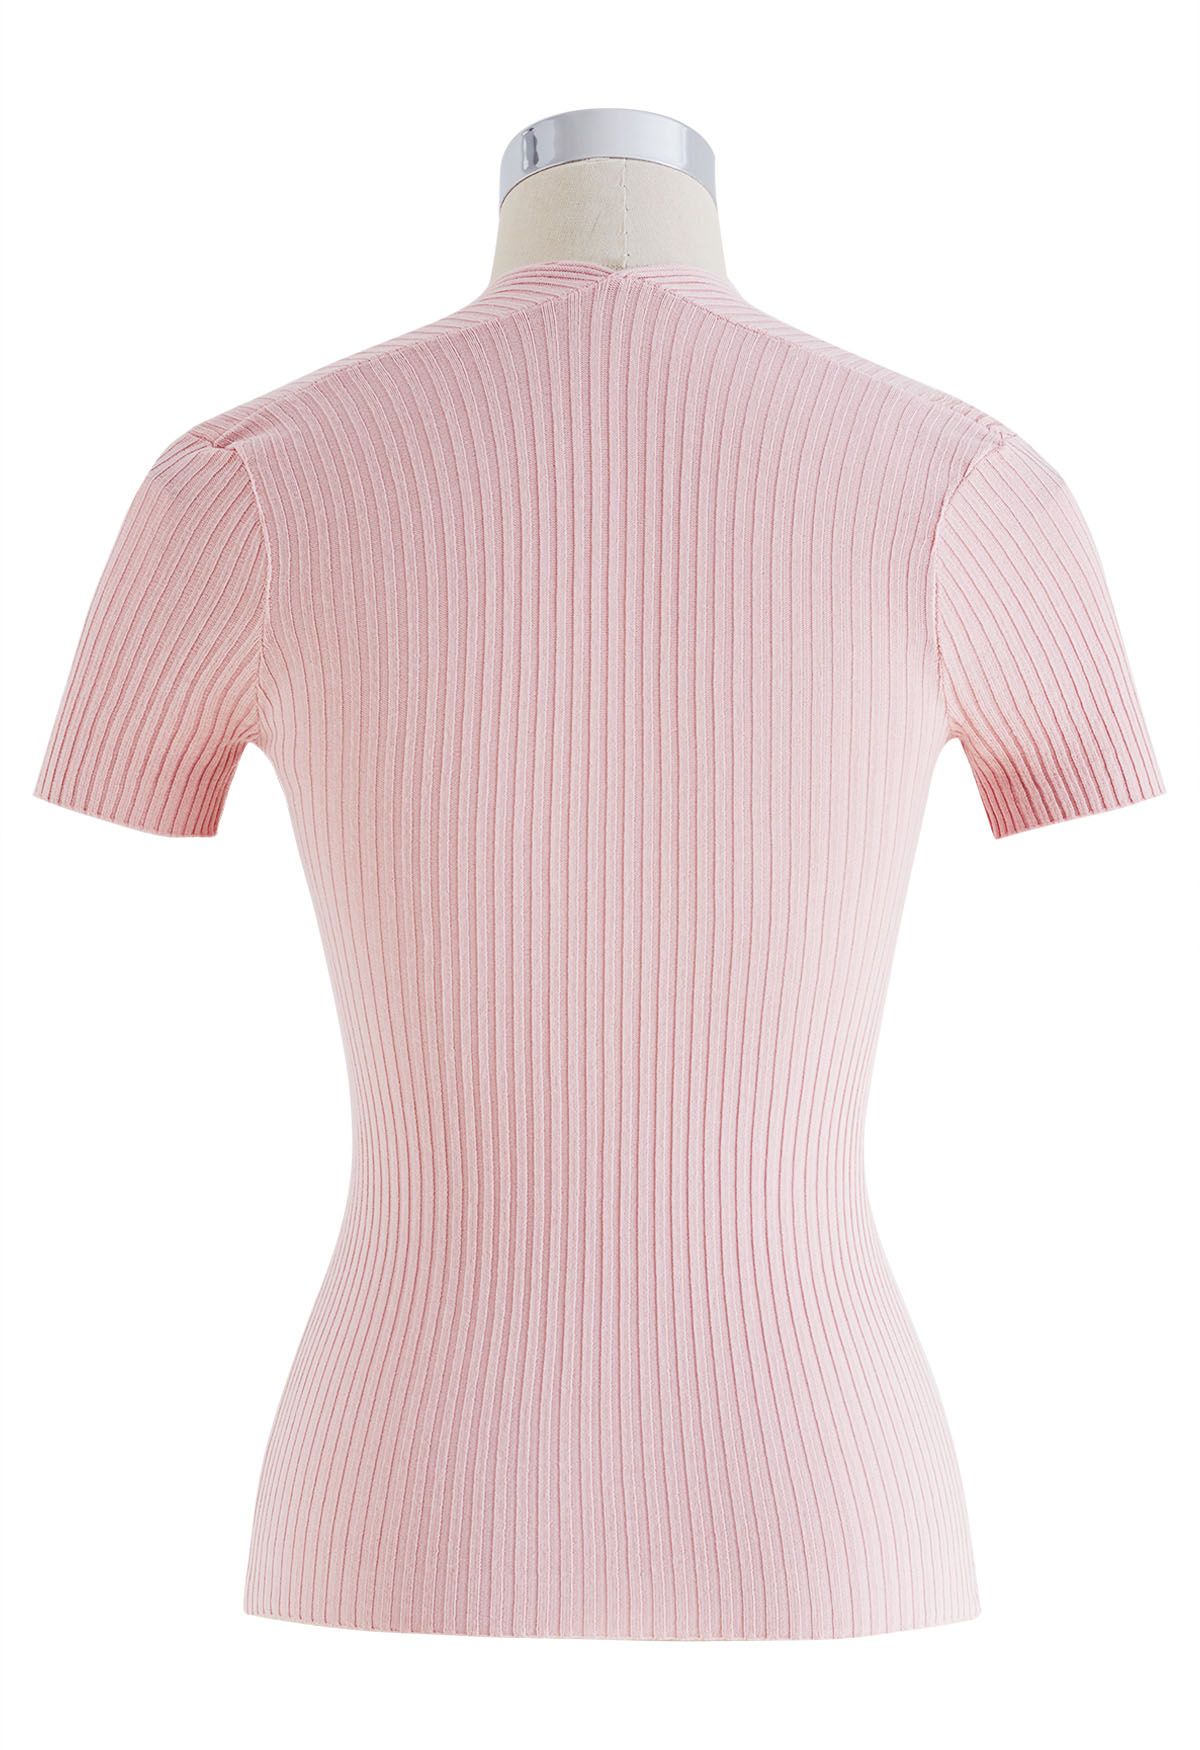 Square Neckline Ribbed Knit Top in Pink